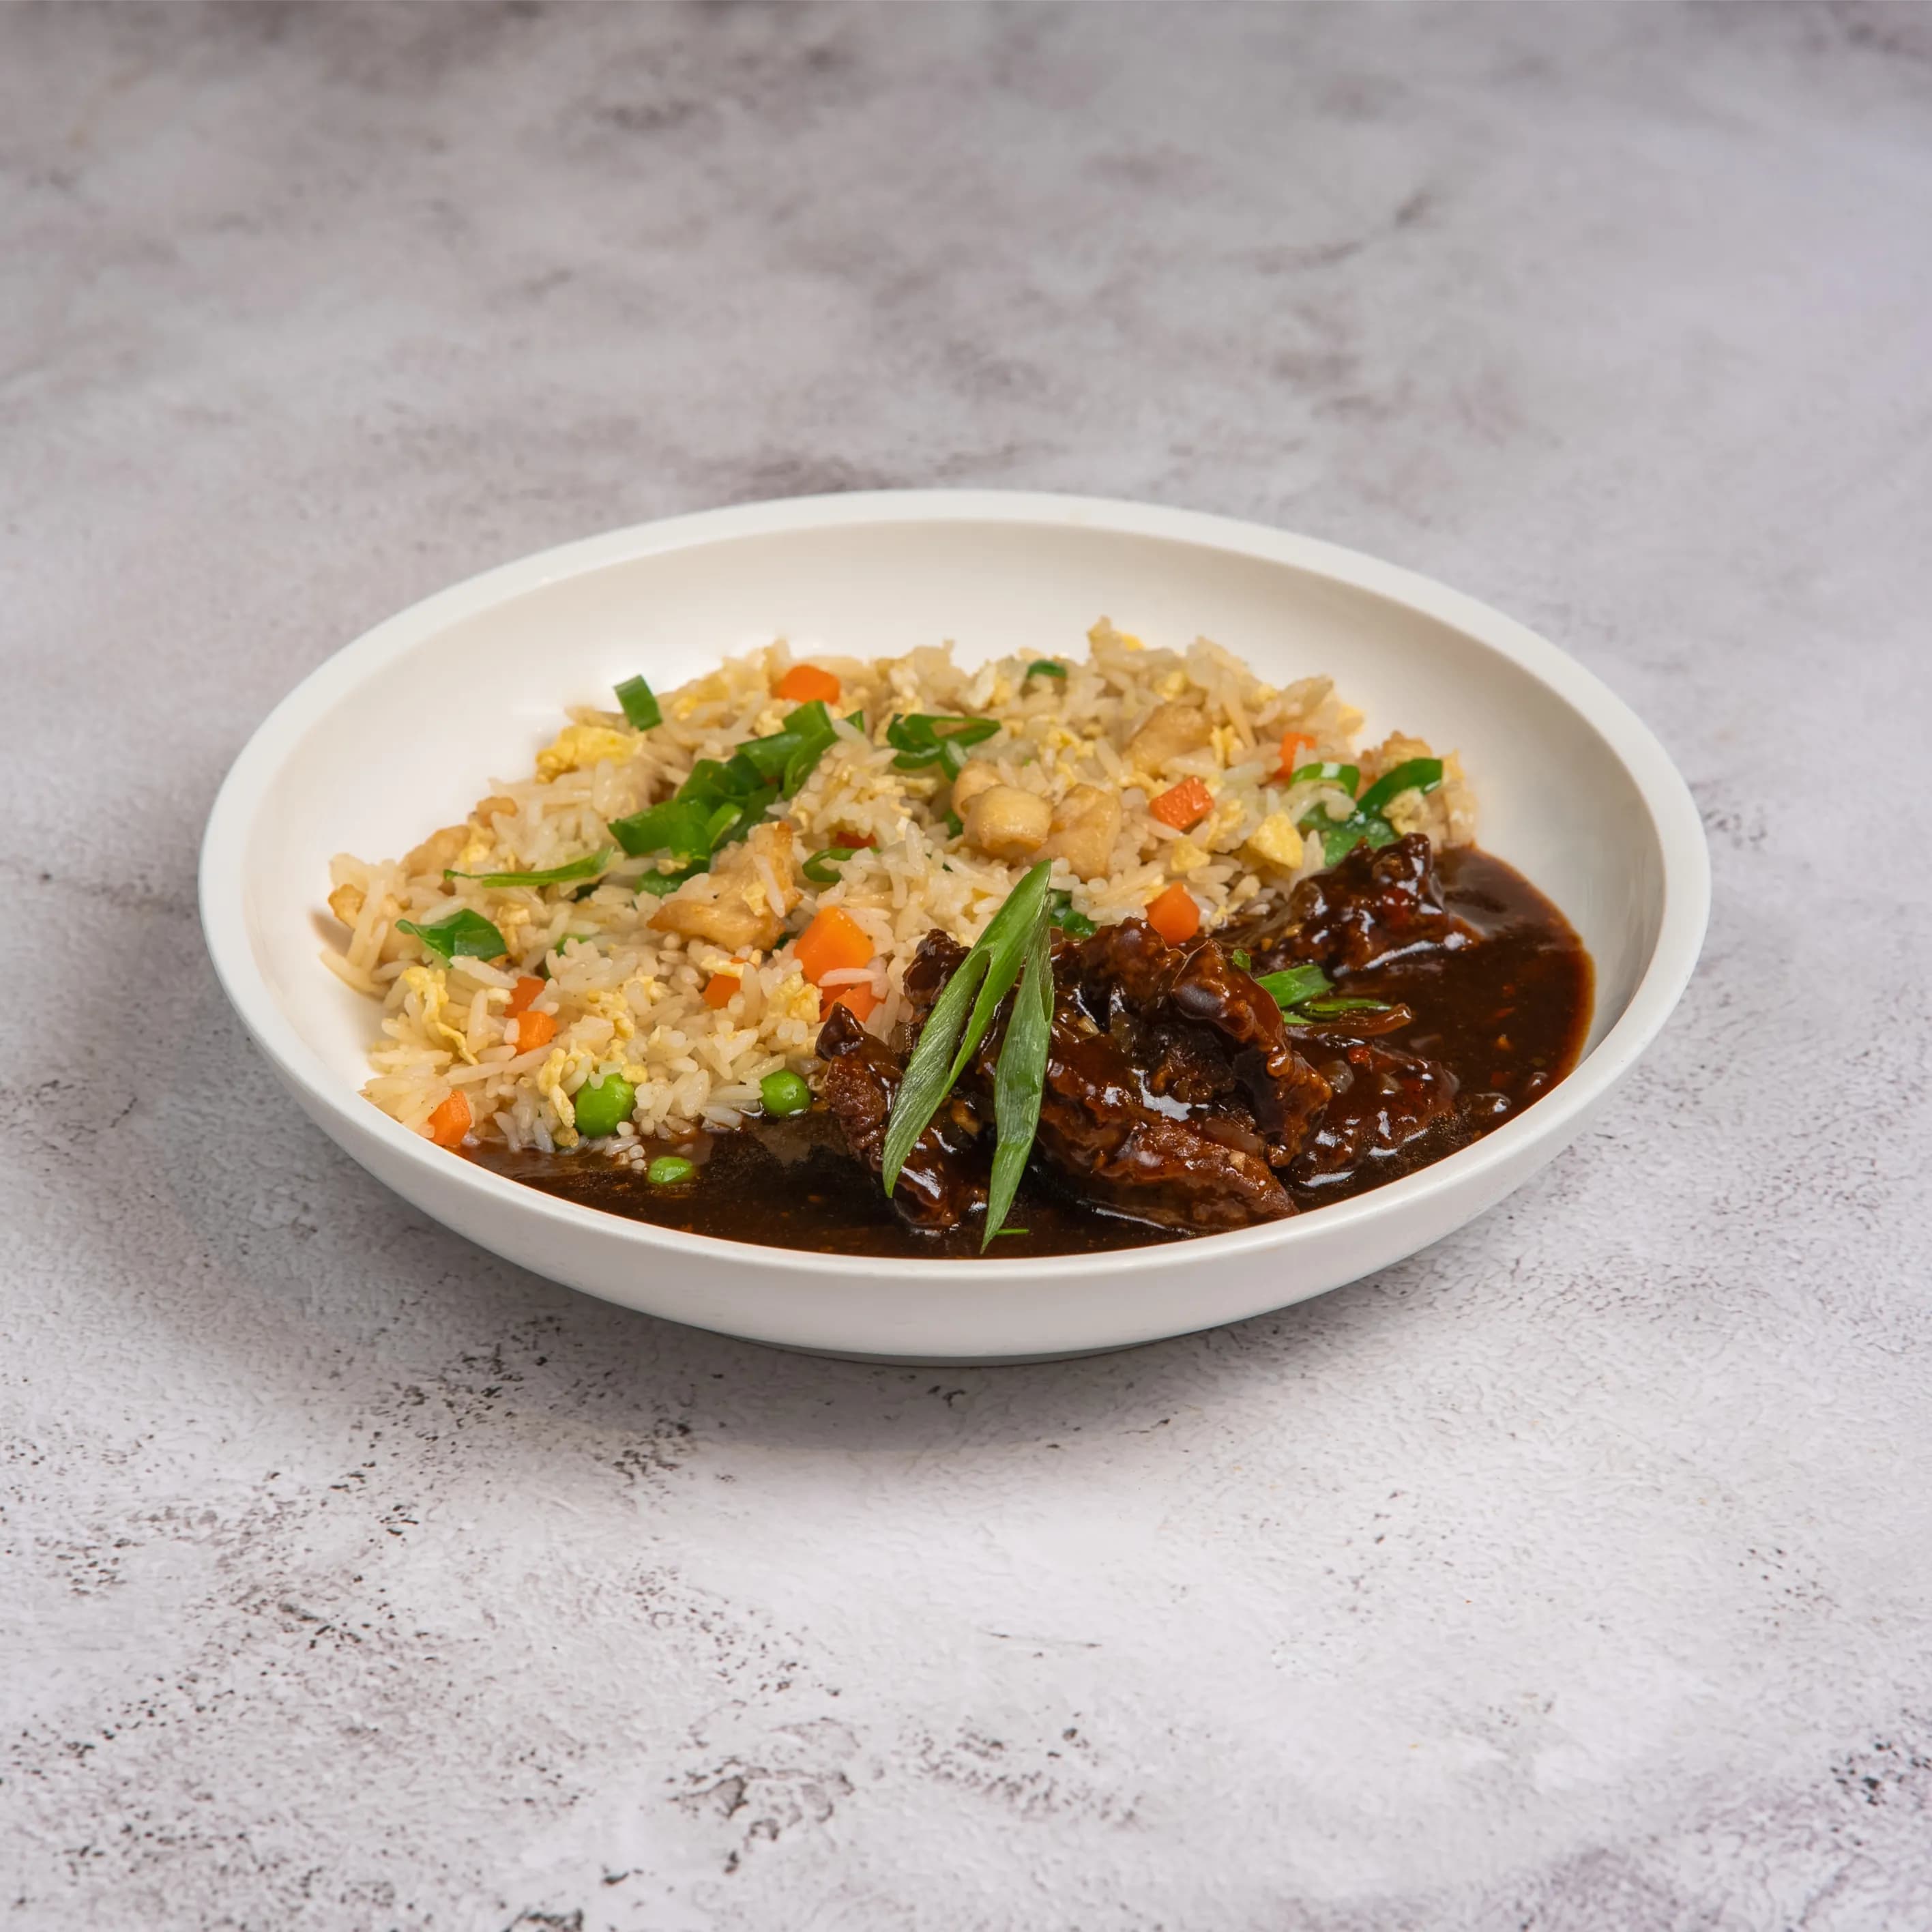 Beef in Black Pepper and Fried Rice Meal